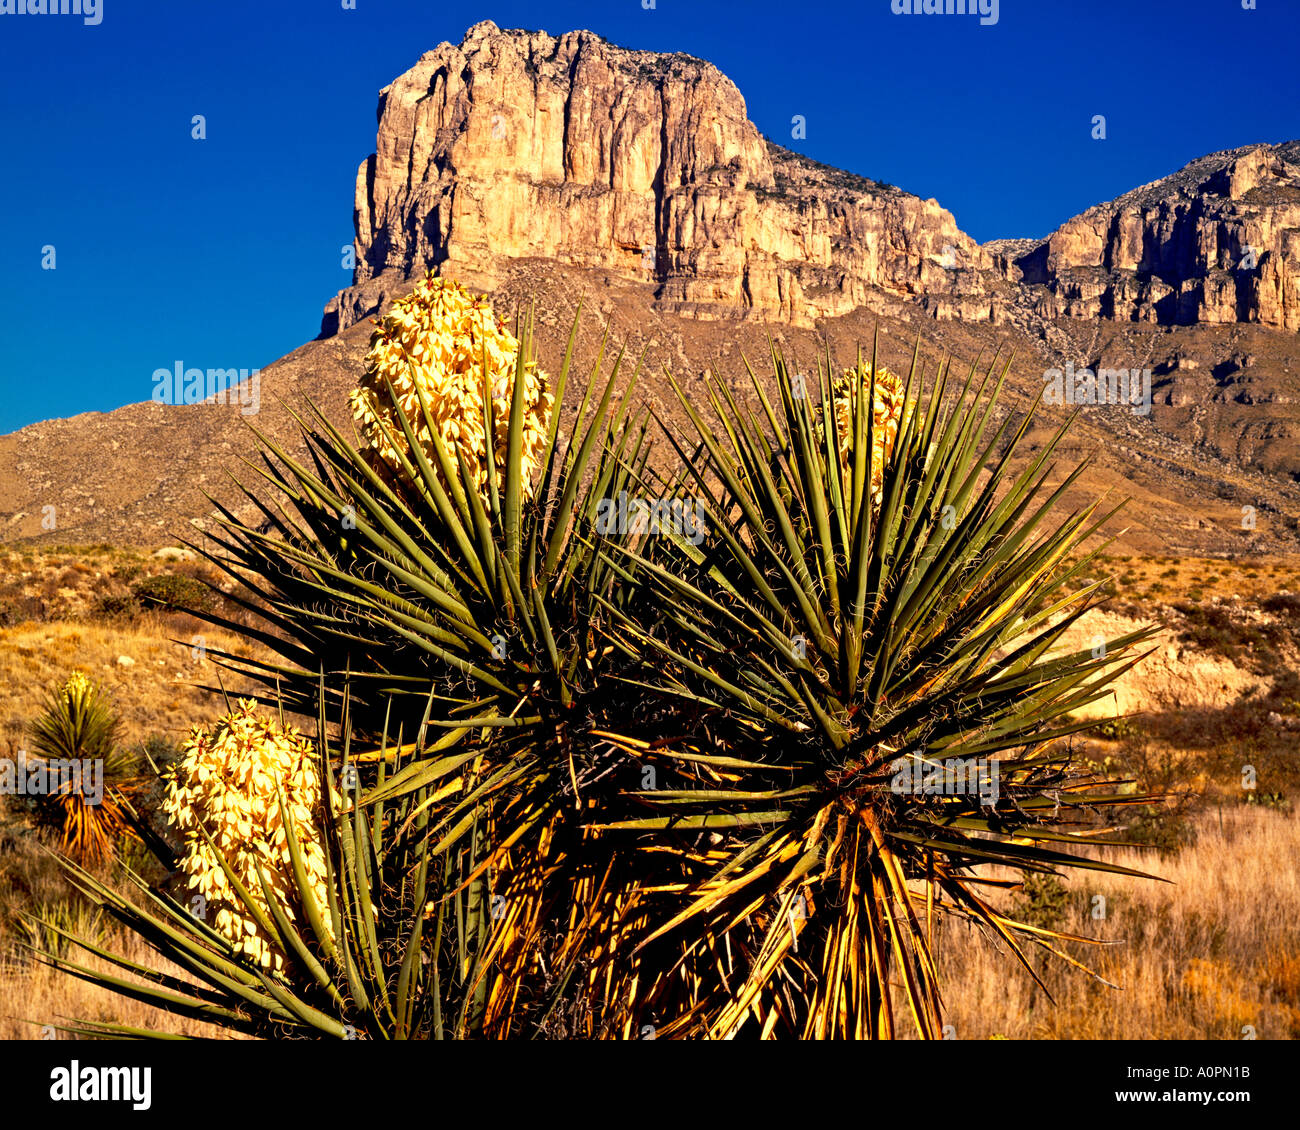 Guadalupe Peak Guadalupe Mountains National Park Texas Stock Photo